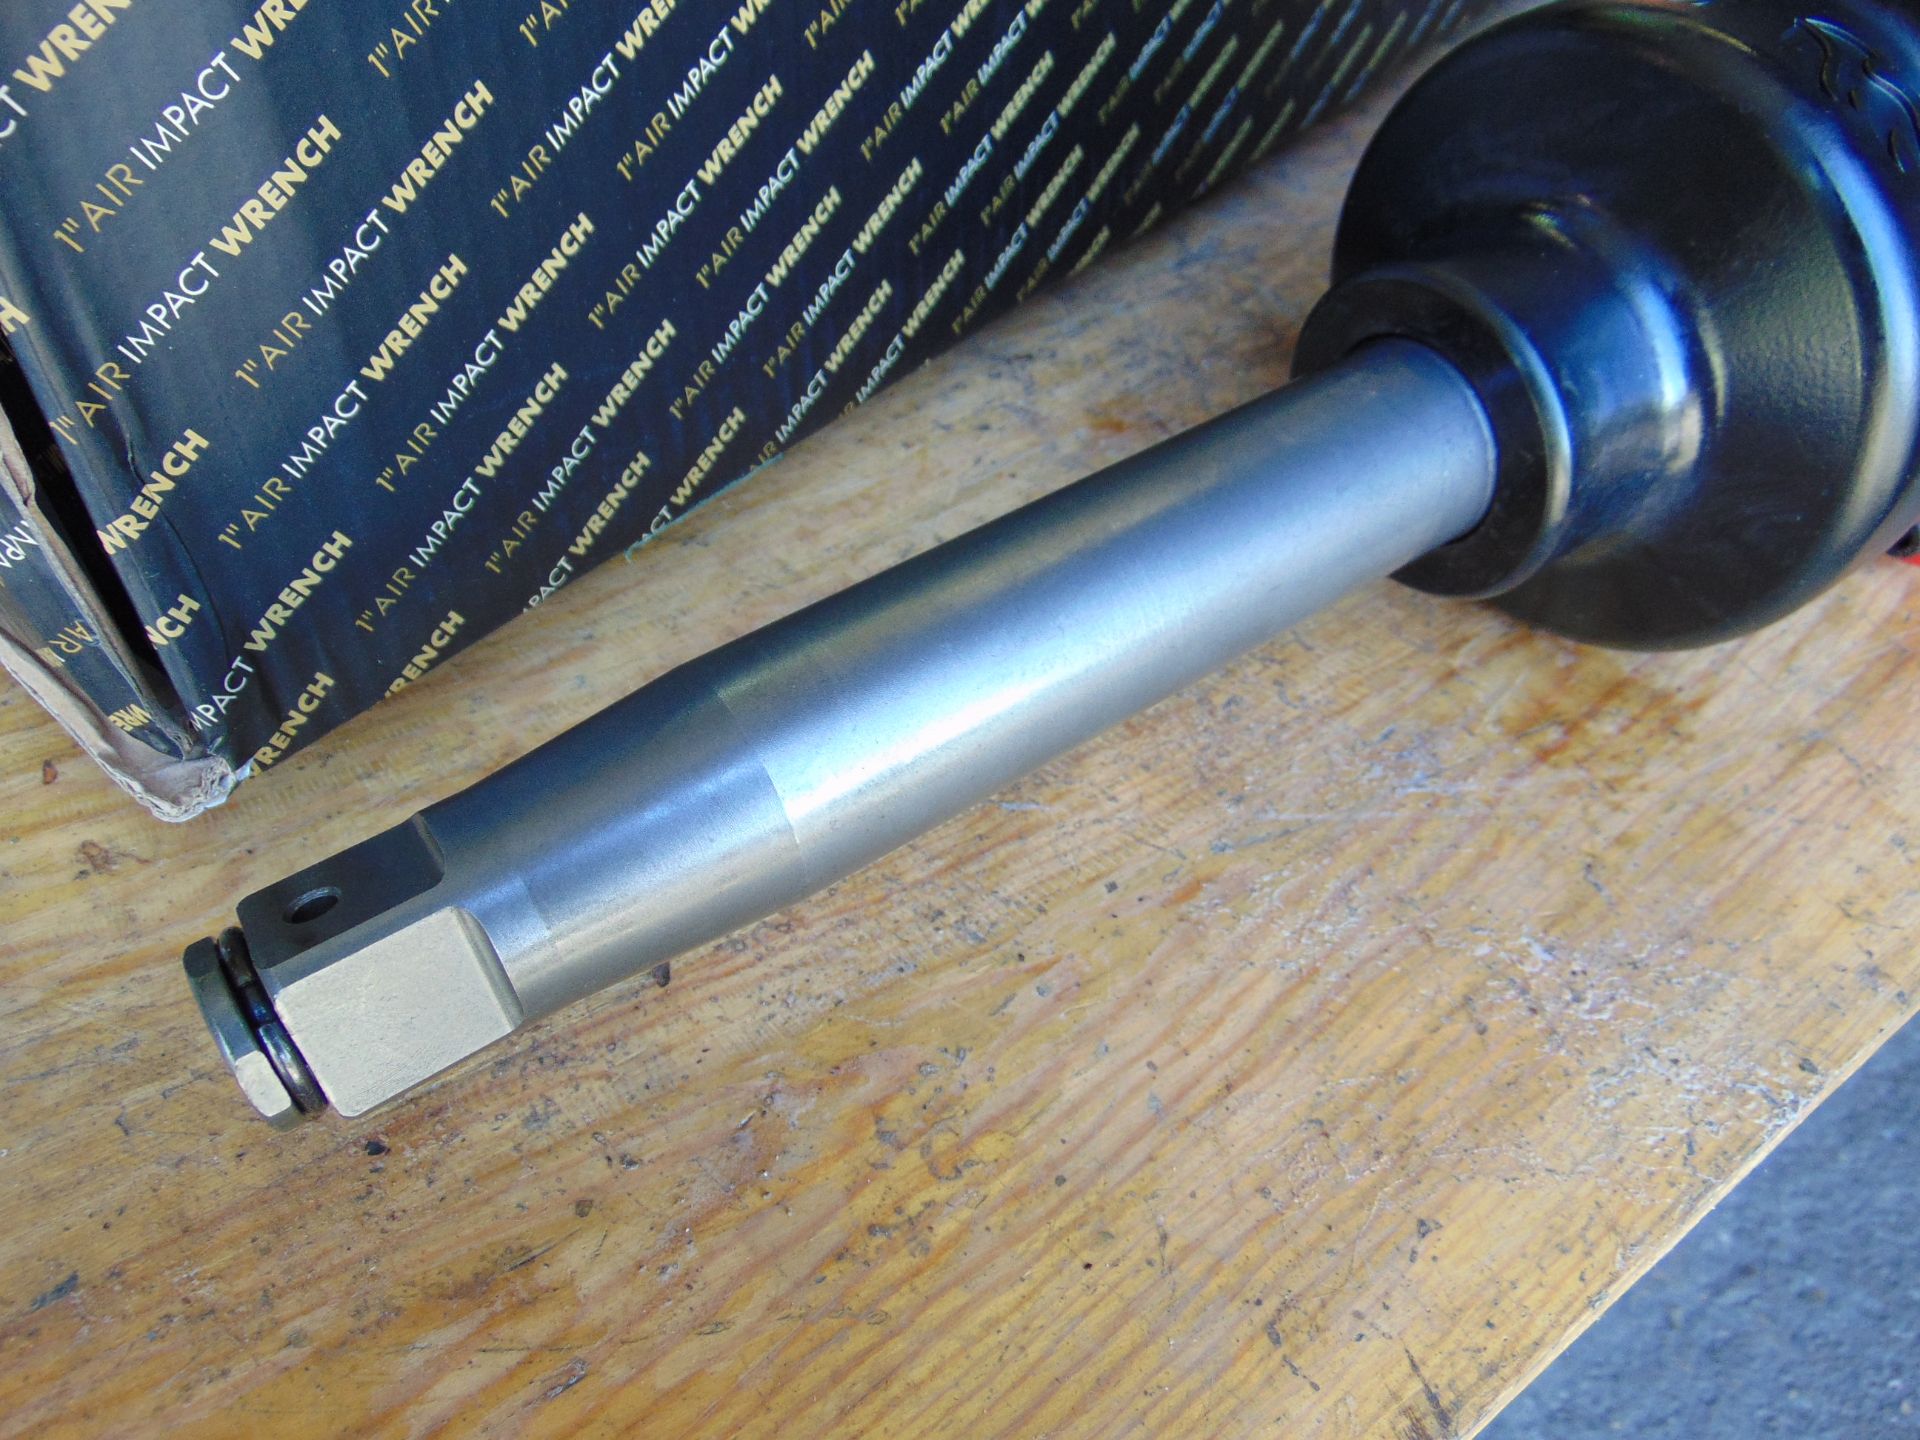 New / Unused 1 inch Air Impact Wrench - Image 9 of 15